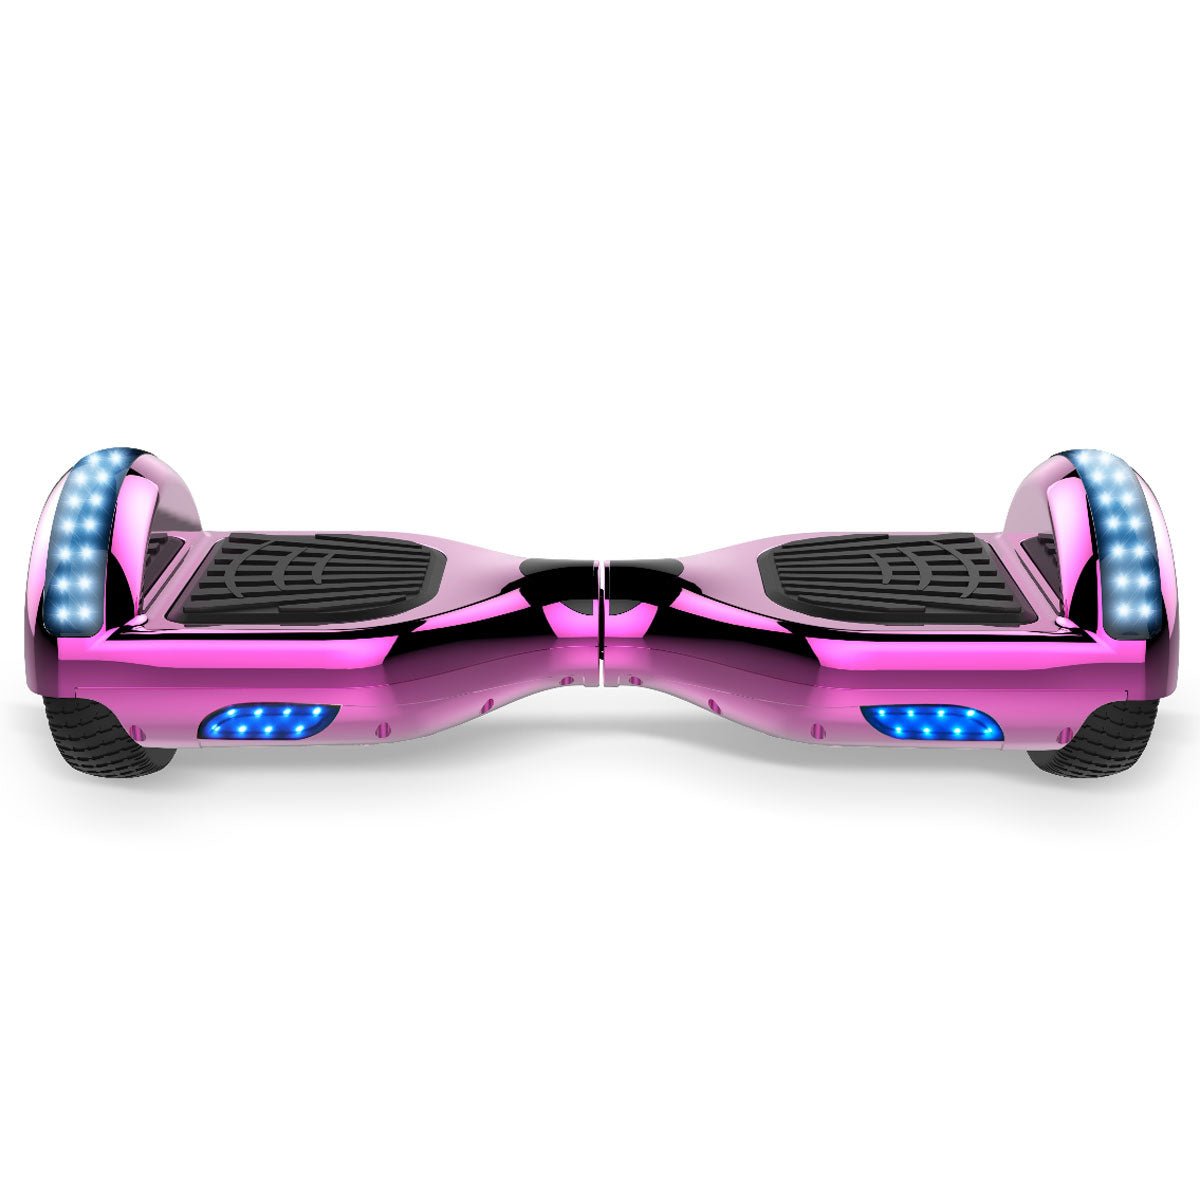 AOVO Balance Wheel Adults Kids Electric Hoverboard - 5 Color Options, 120 kg Payload, Bluetooth Speaker - 6.5 inches Tyres with light-up LED - 24 Month Warranty